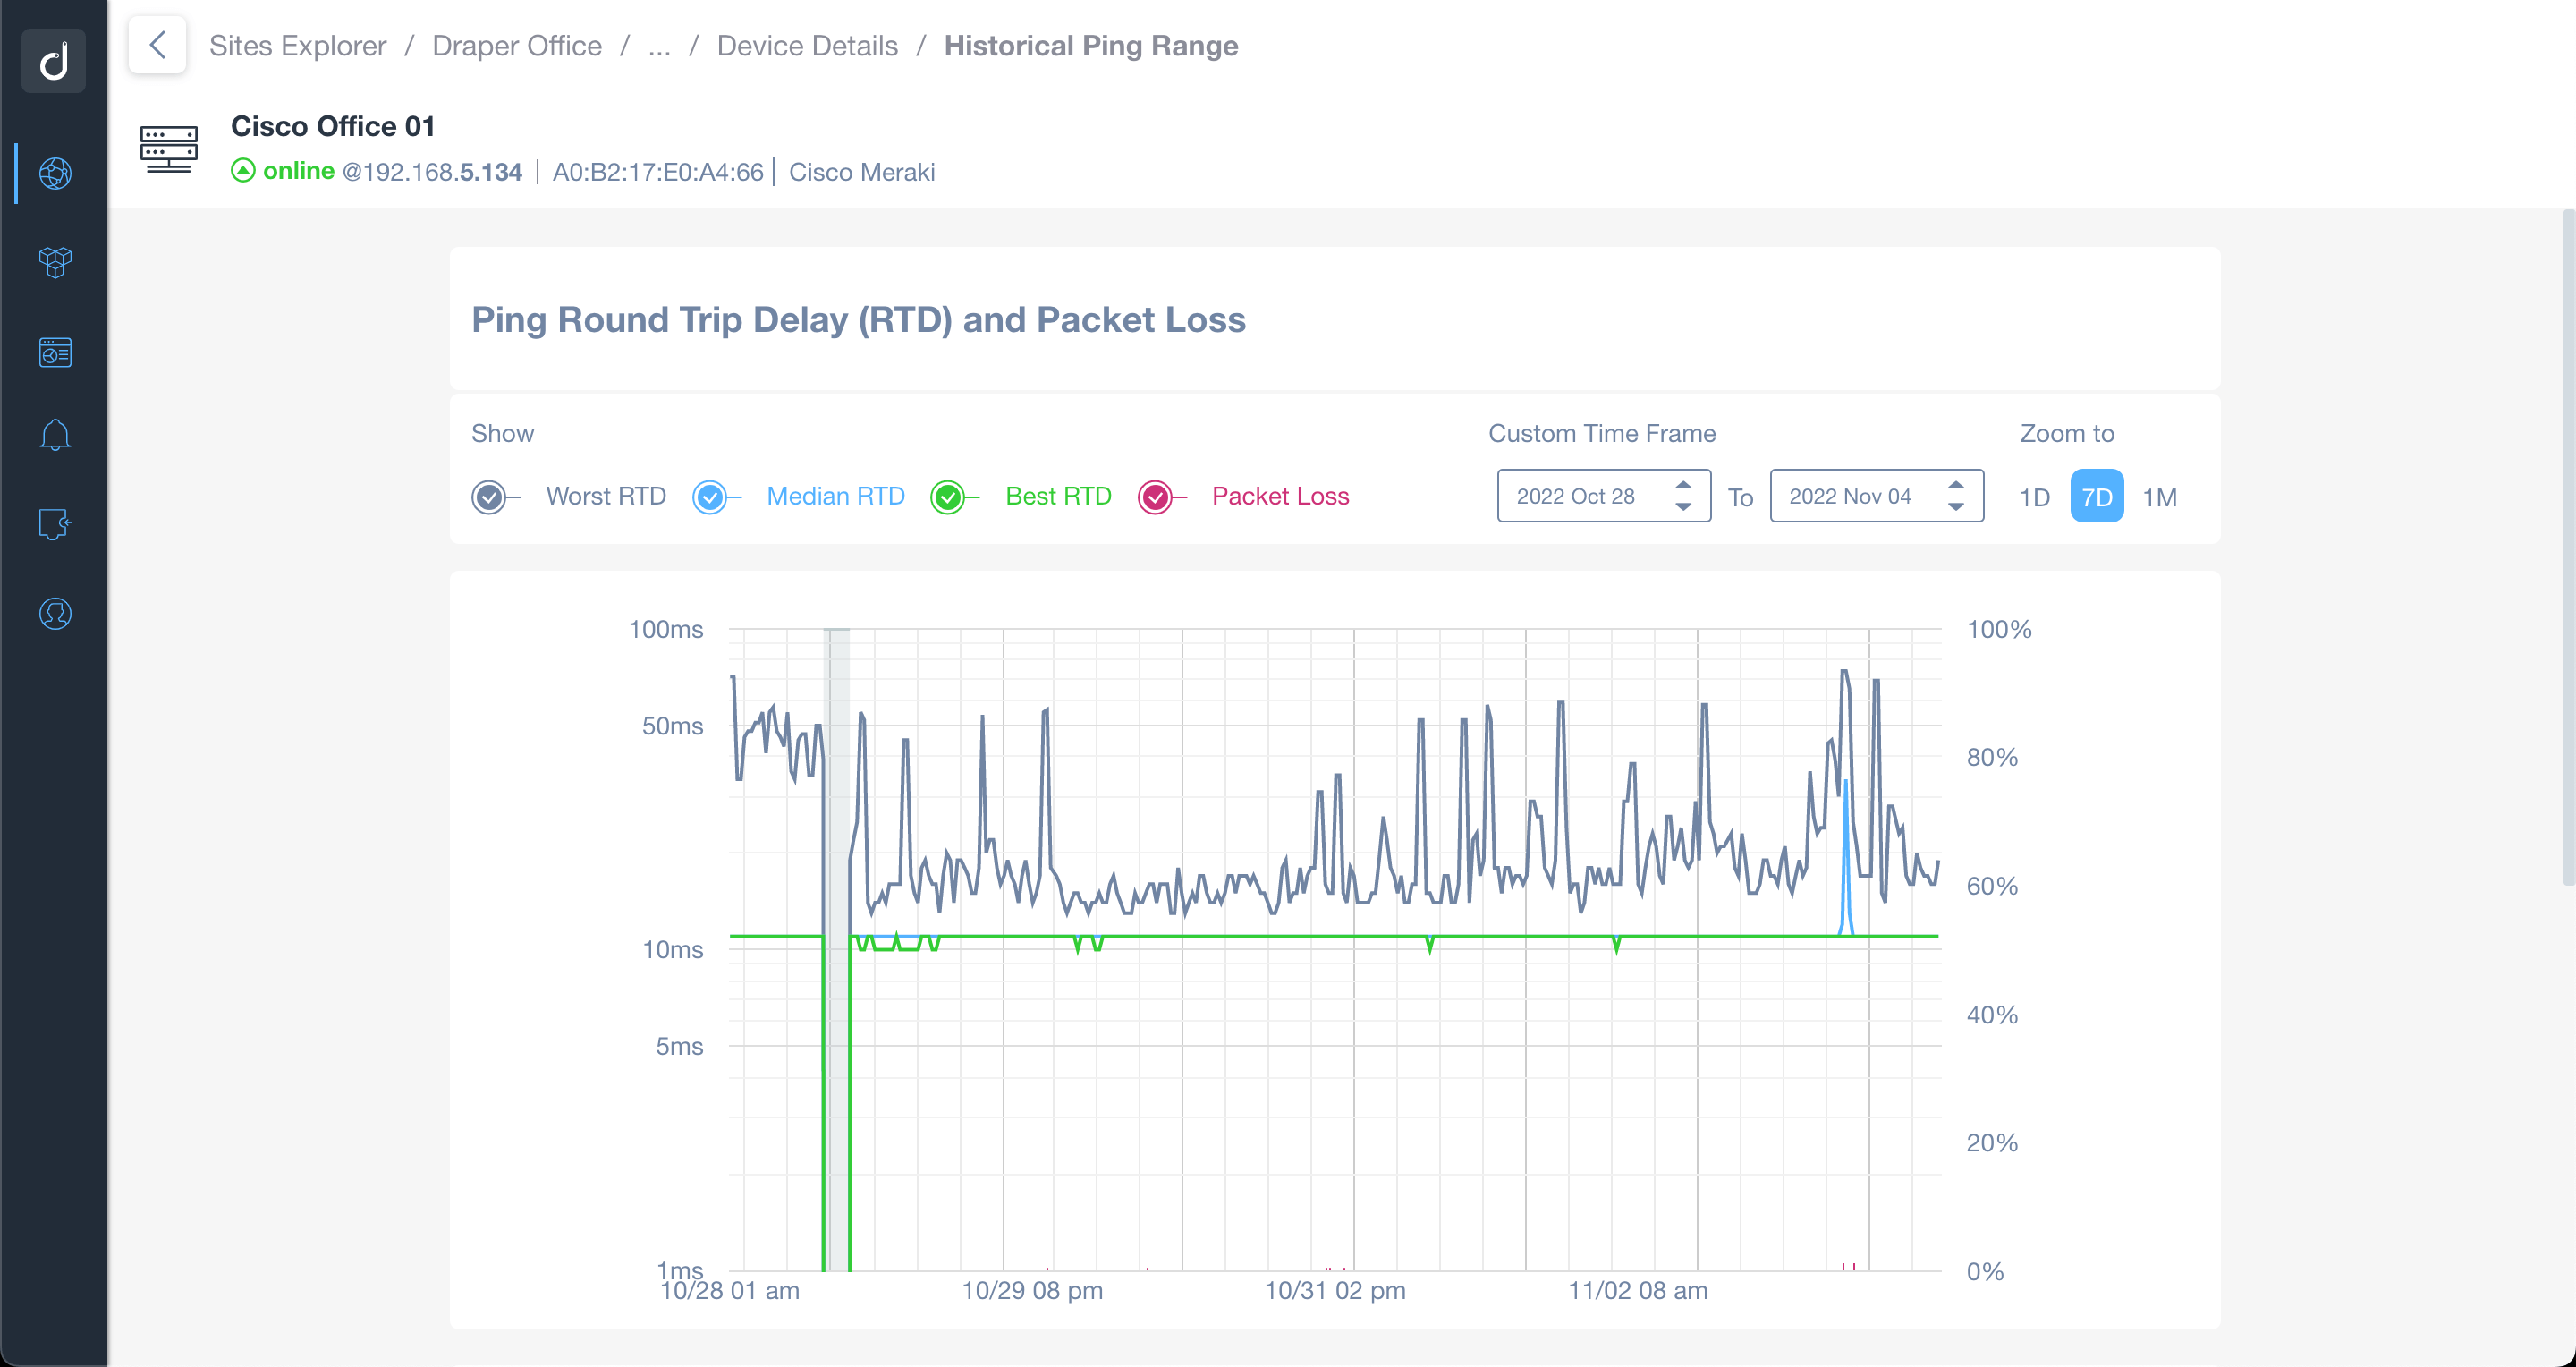 Ping Round Trip Delay and Packet Loss